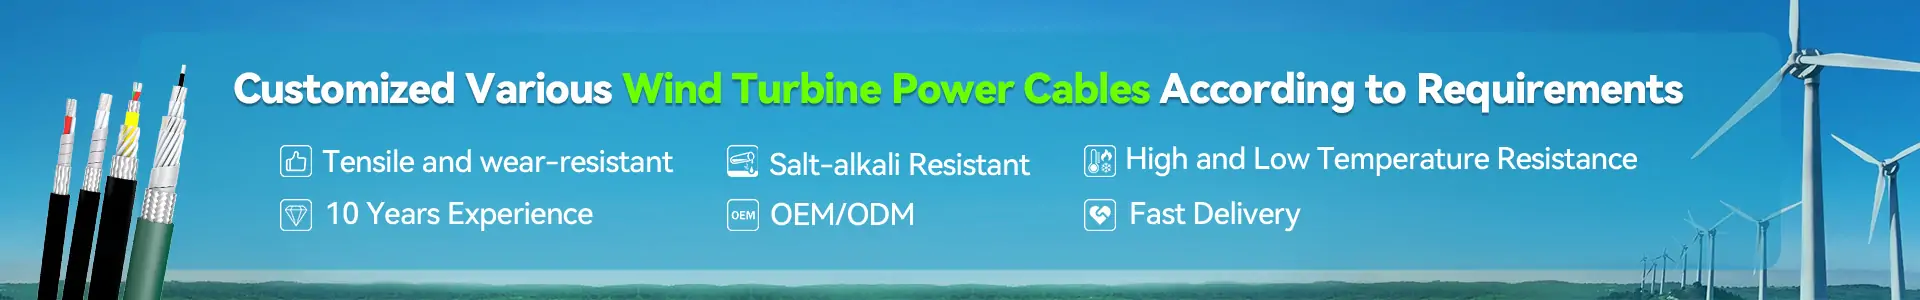 wind tuebine power cable